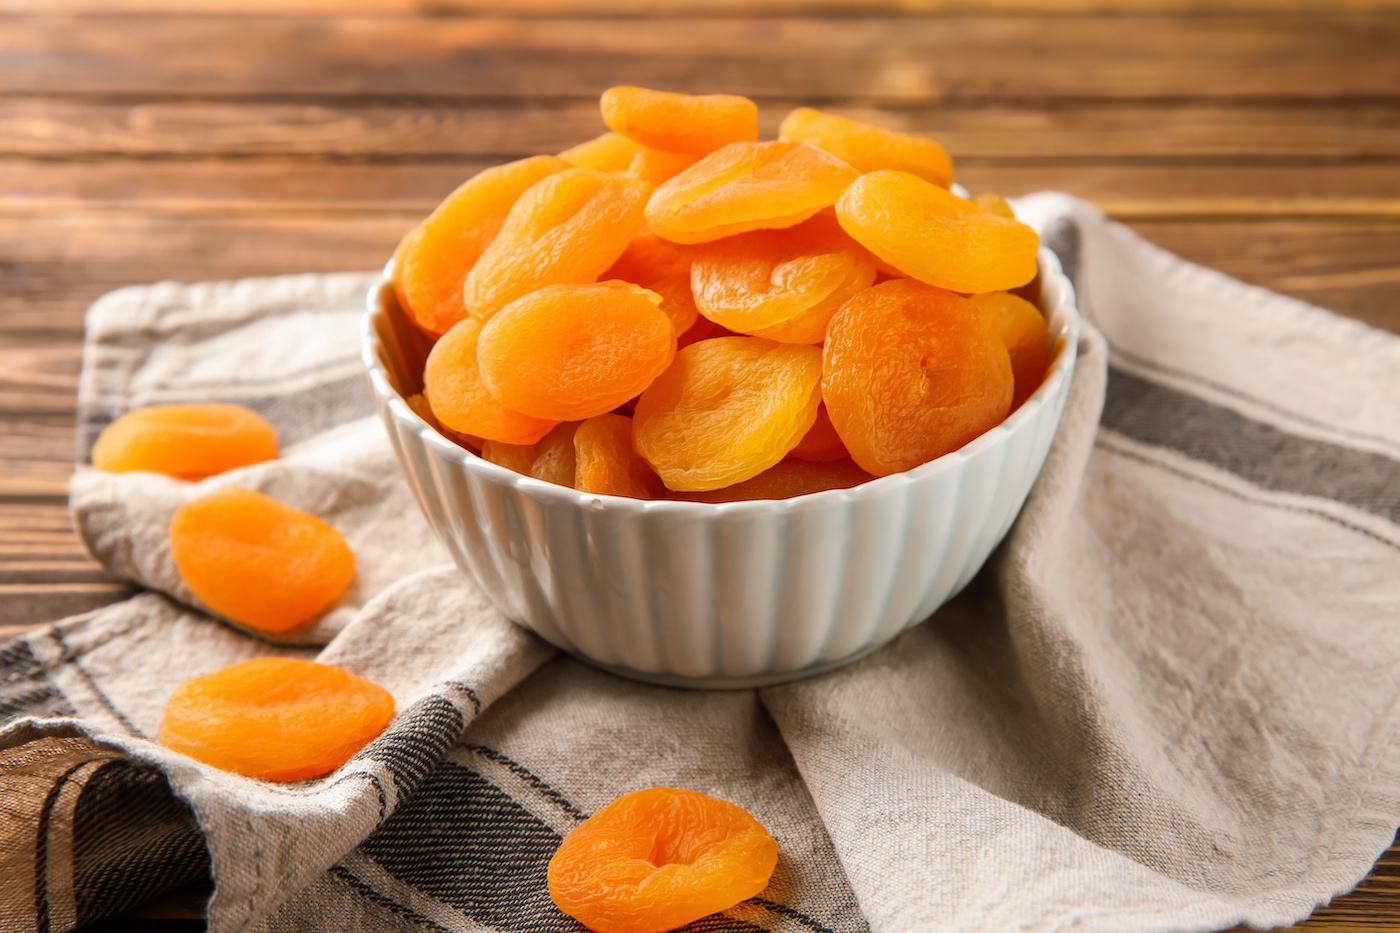 Bowl of dried apricots on a table